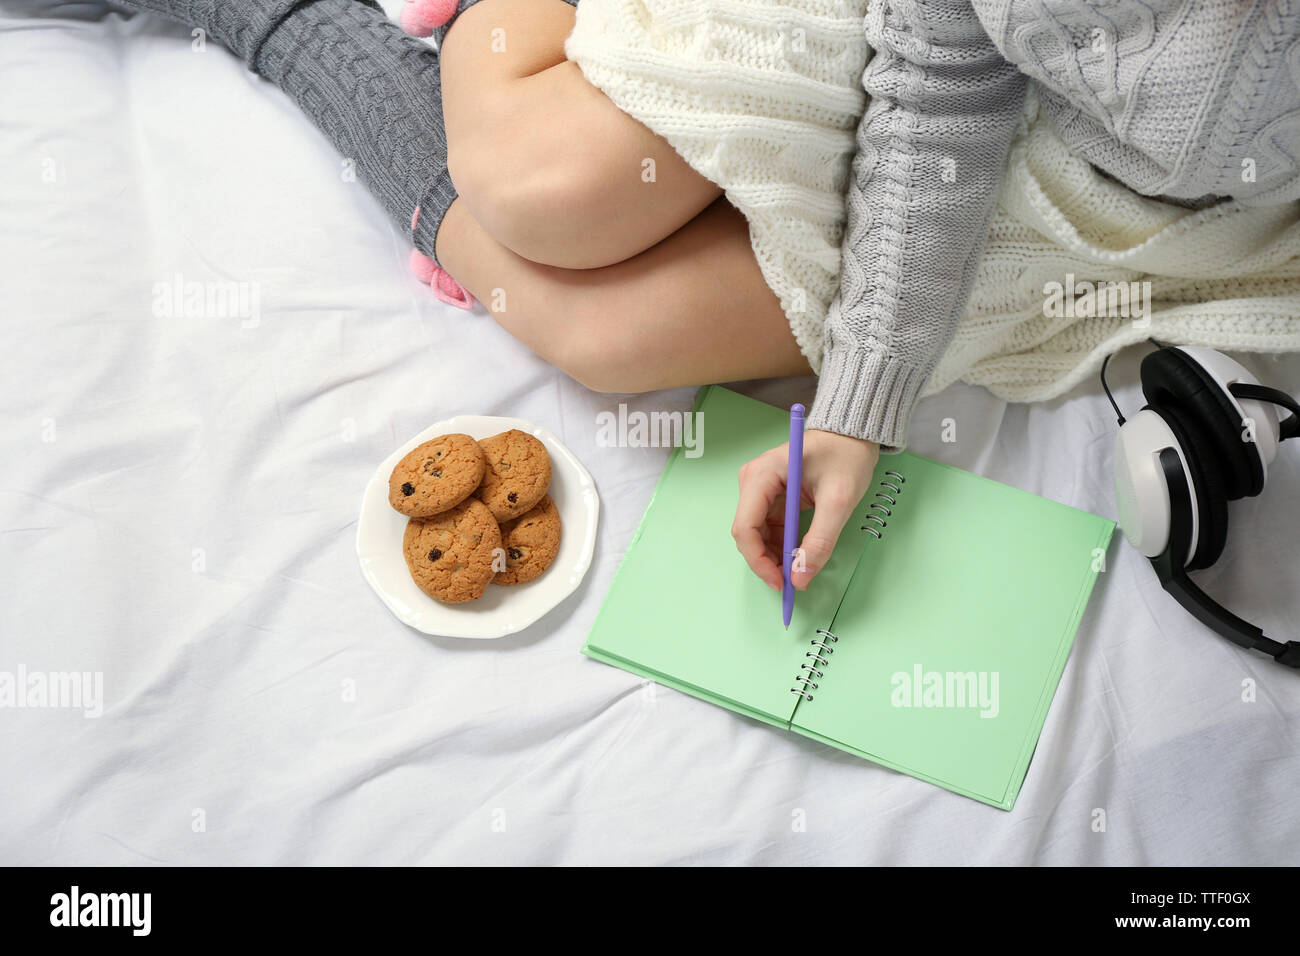 Woman with headphones writing diary on her bed Stock Photo